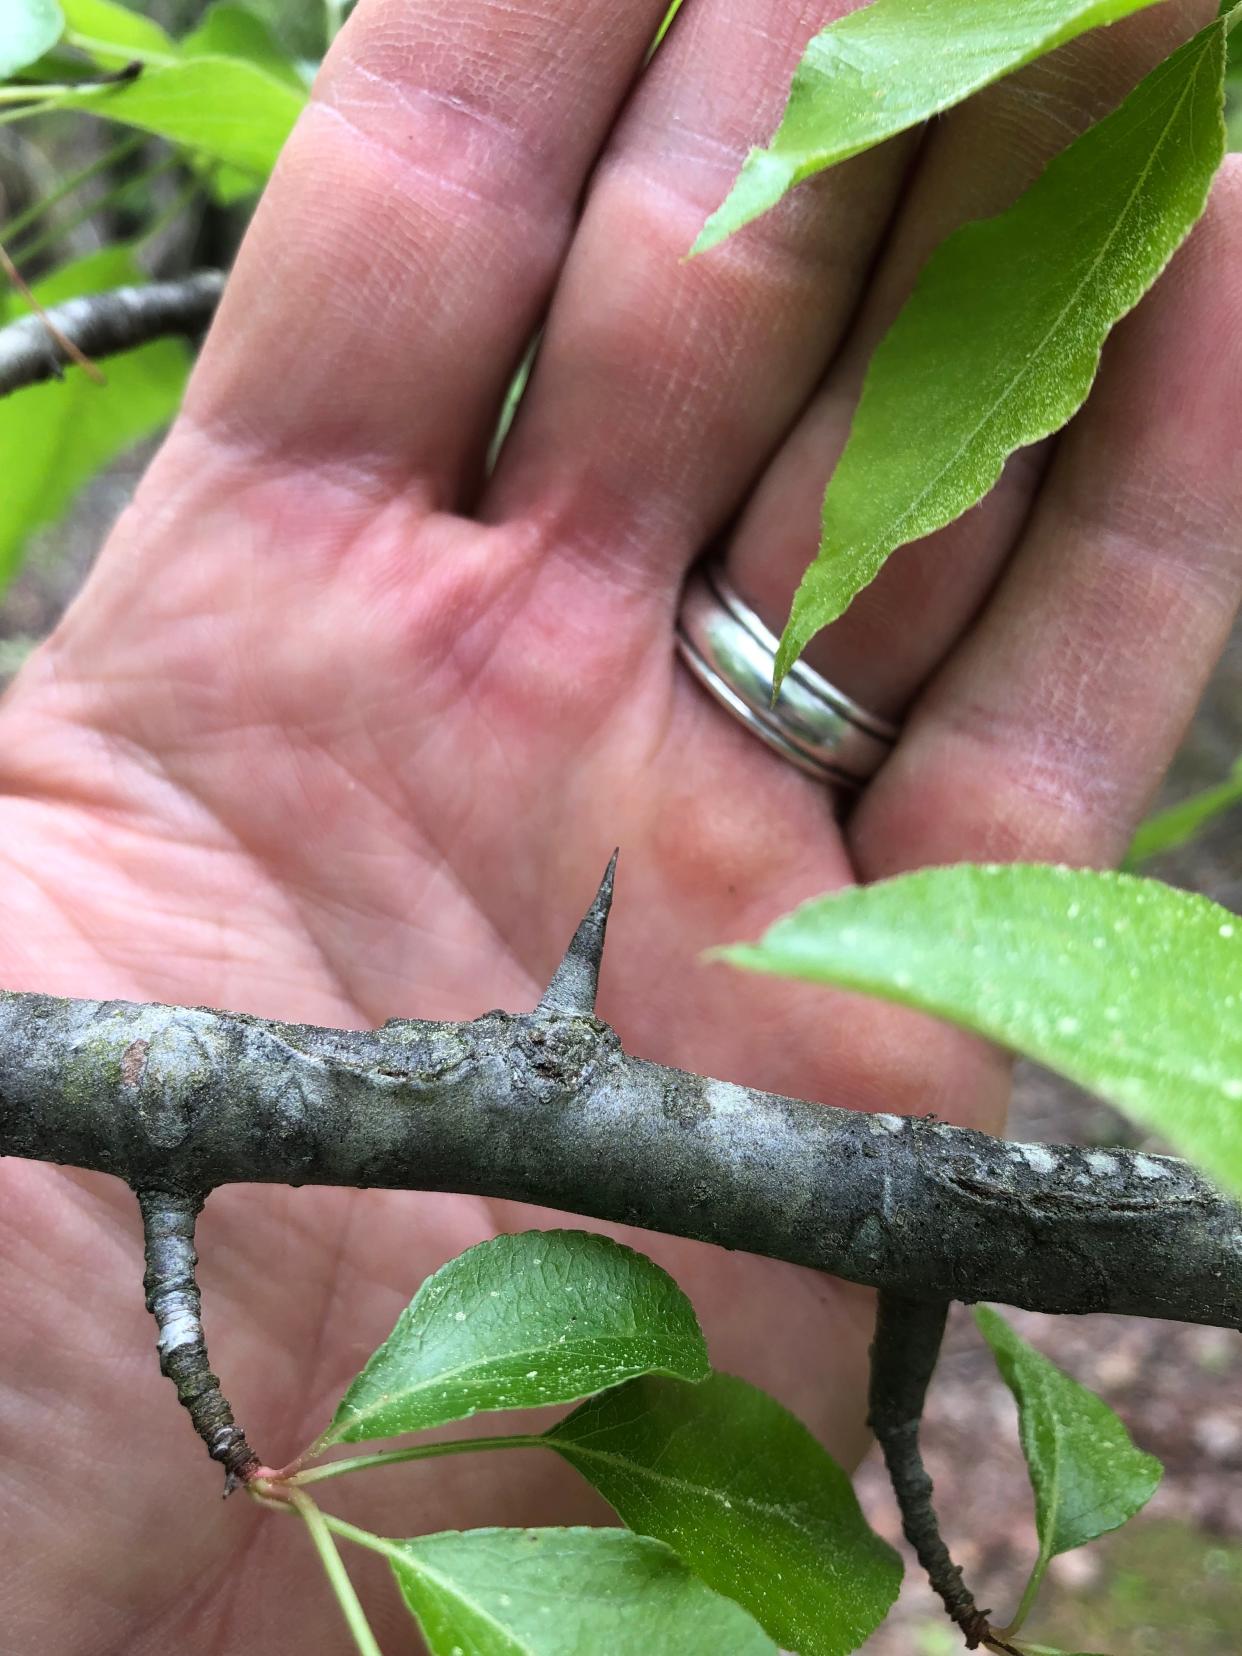 Thorns on a Callery pear tree. When the number of thorny trees thicken, it can make it hard to remove the trees because the thorns can ruin traditional vehicle tires.